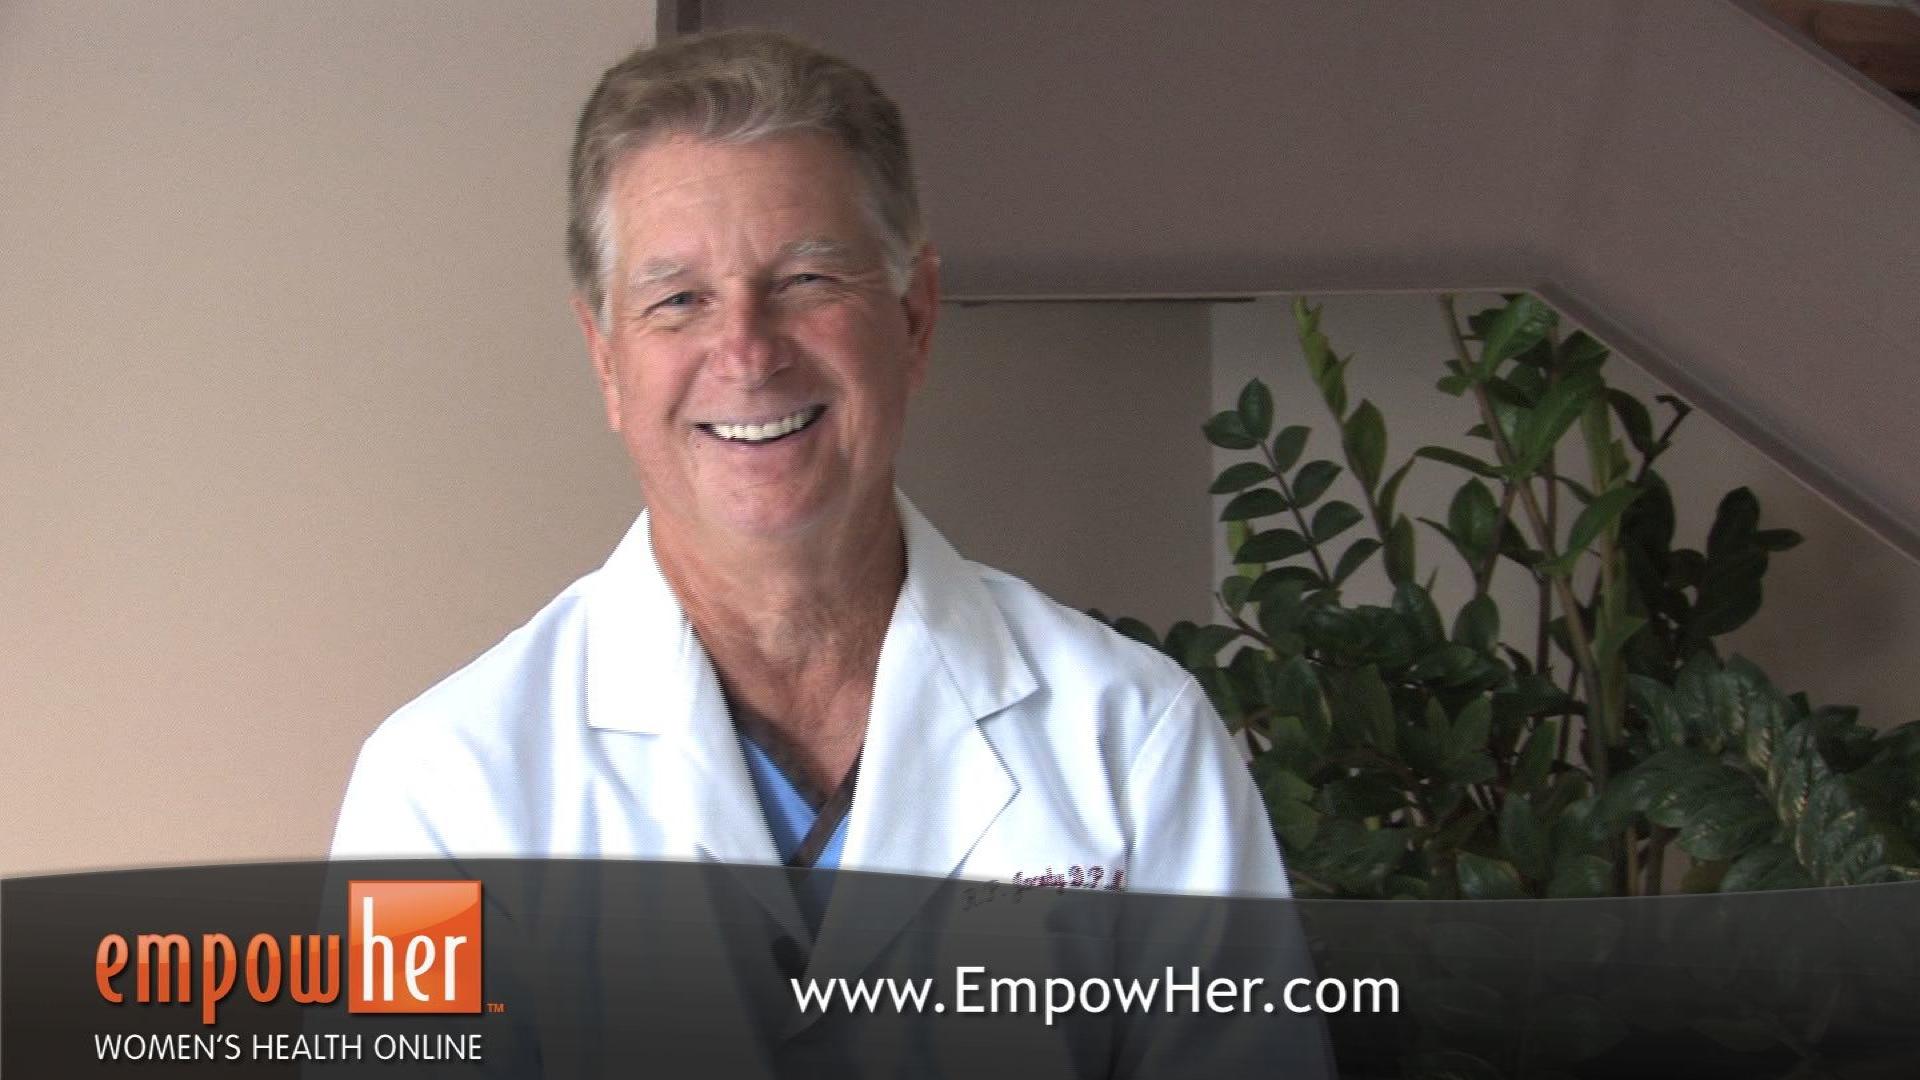 Dr. Jacoby introduces himself and describes toenail fungus and its treatment